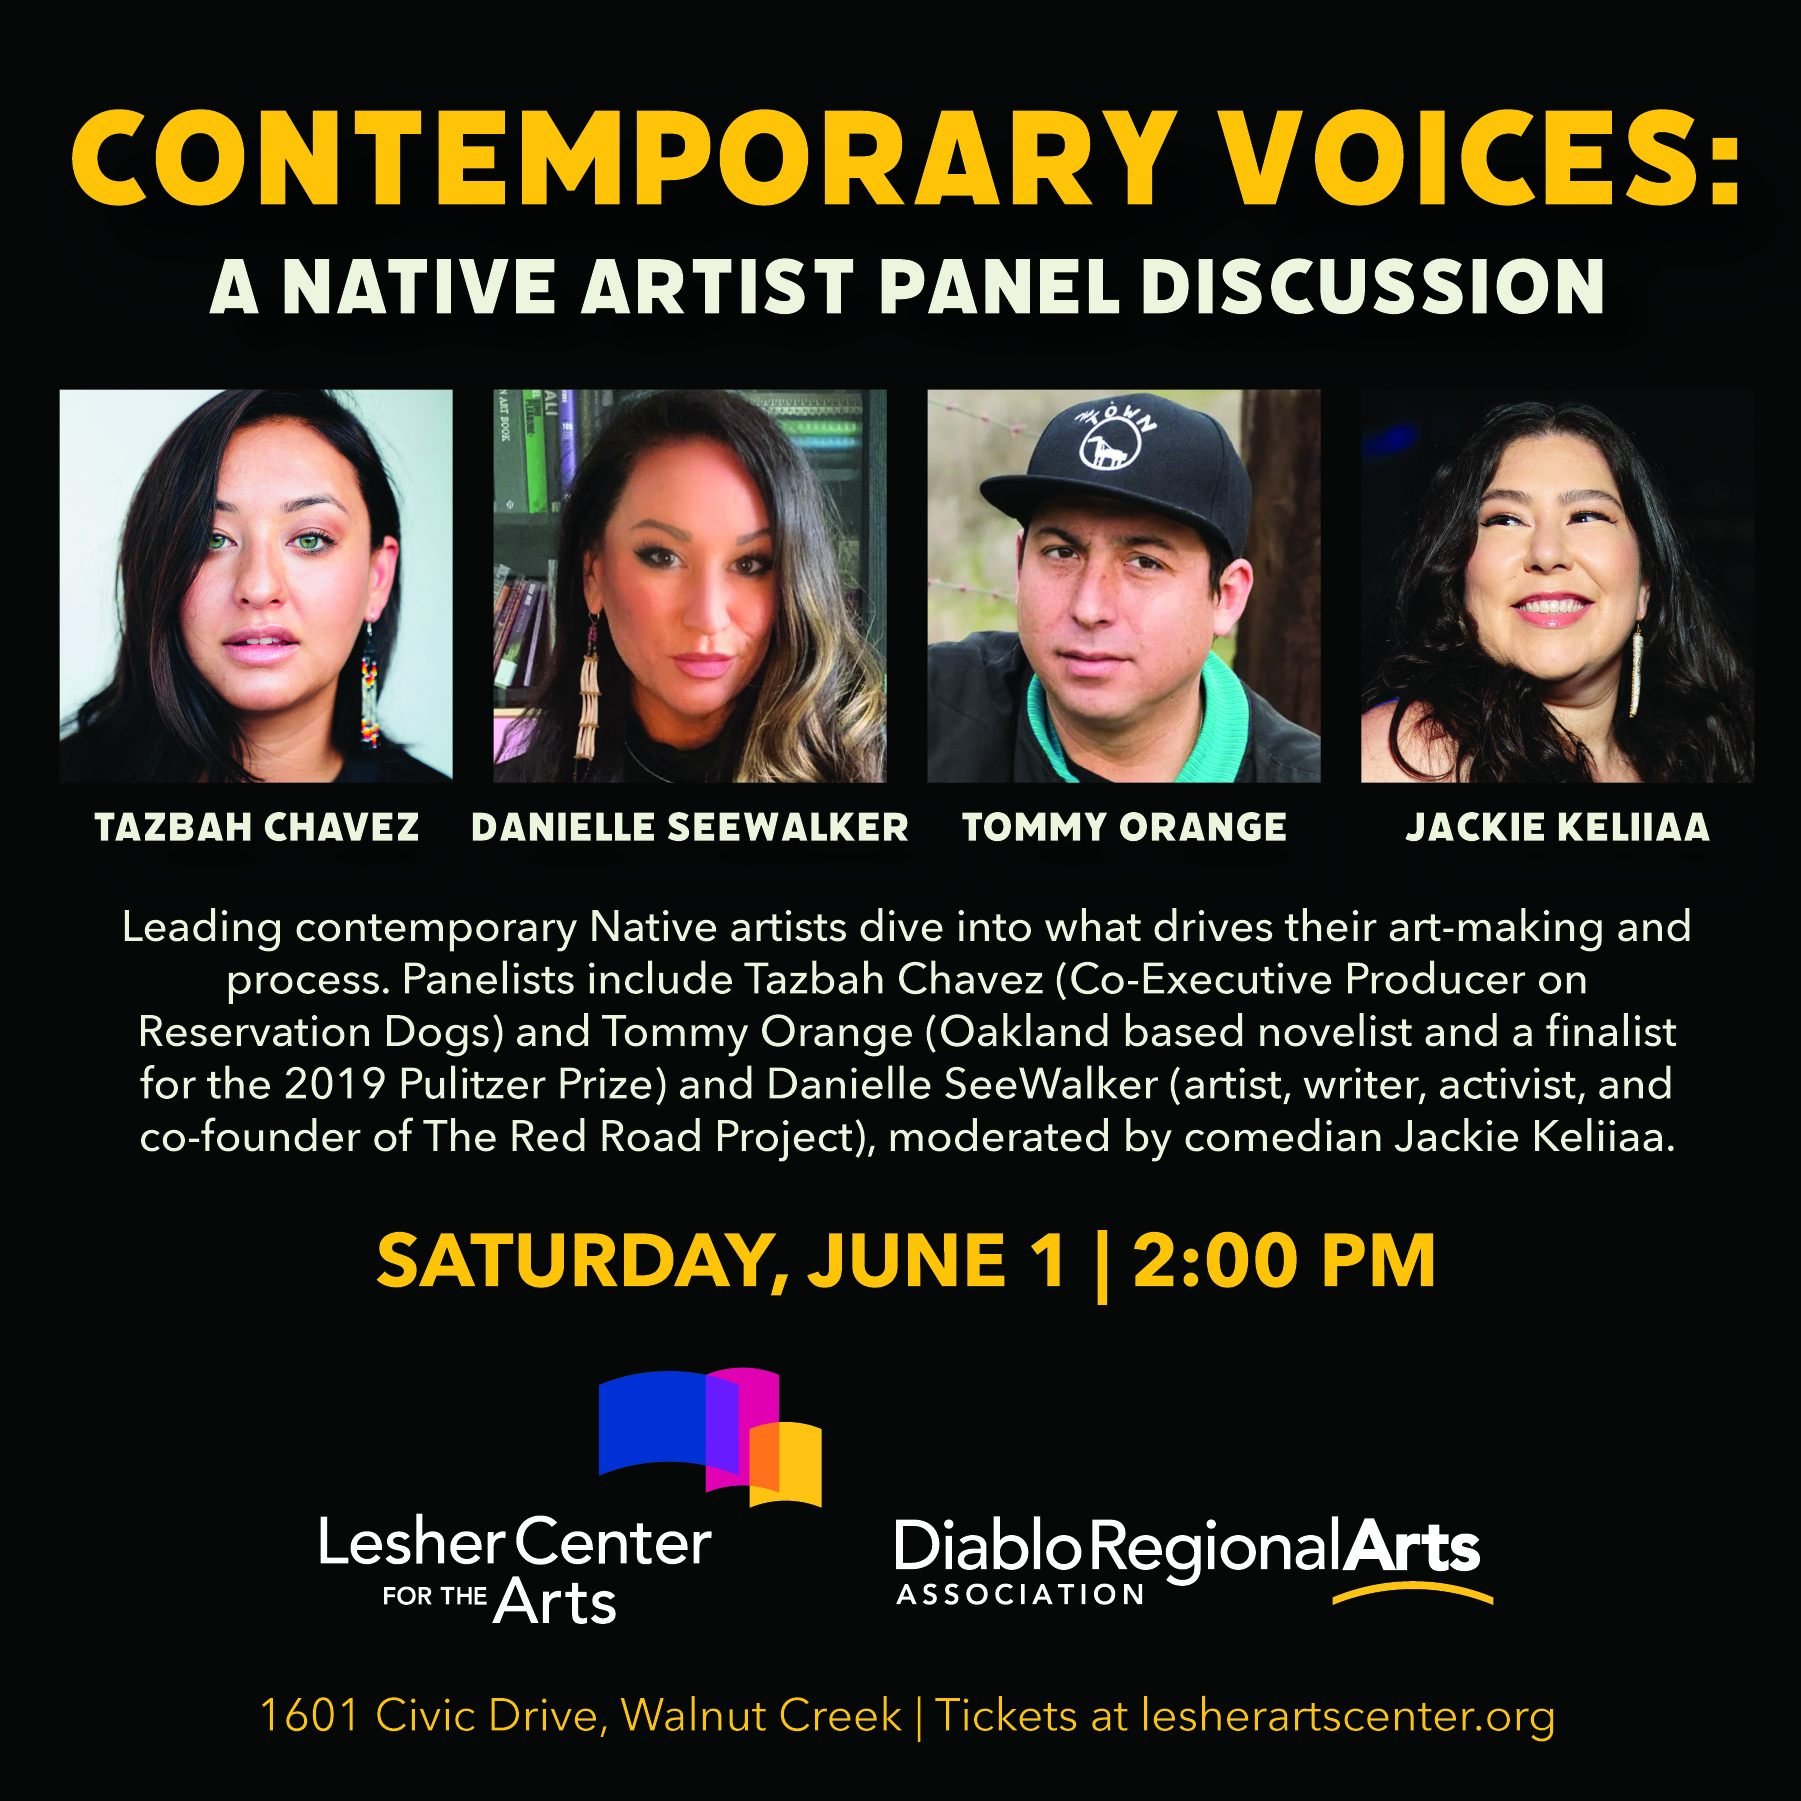 Experience this insightful panel discussion on June 1st! Leading contemporary Native artists will dive into what drives their art-making and process. 

Panelists include @tazbah (Co-Executive Producer on Reservation Dogs), Tommy Orange (Oakland-based